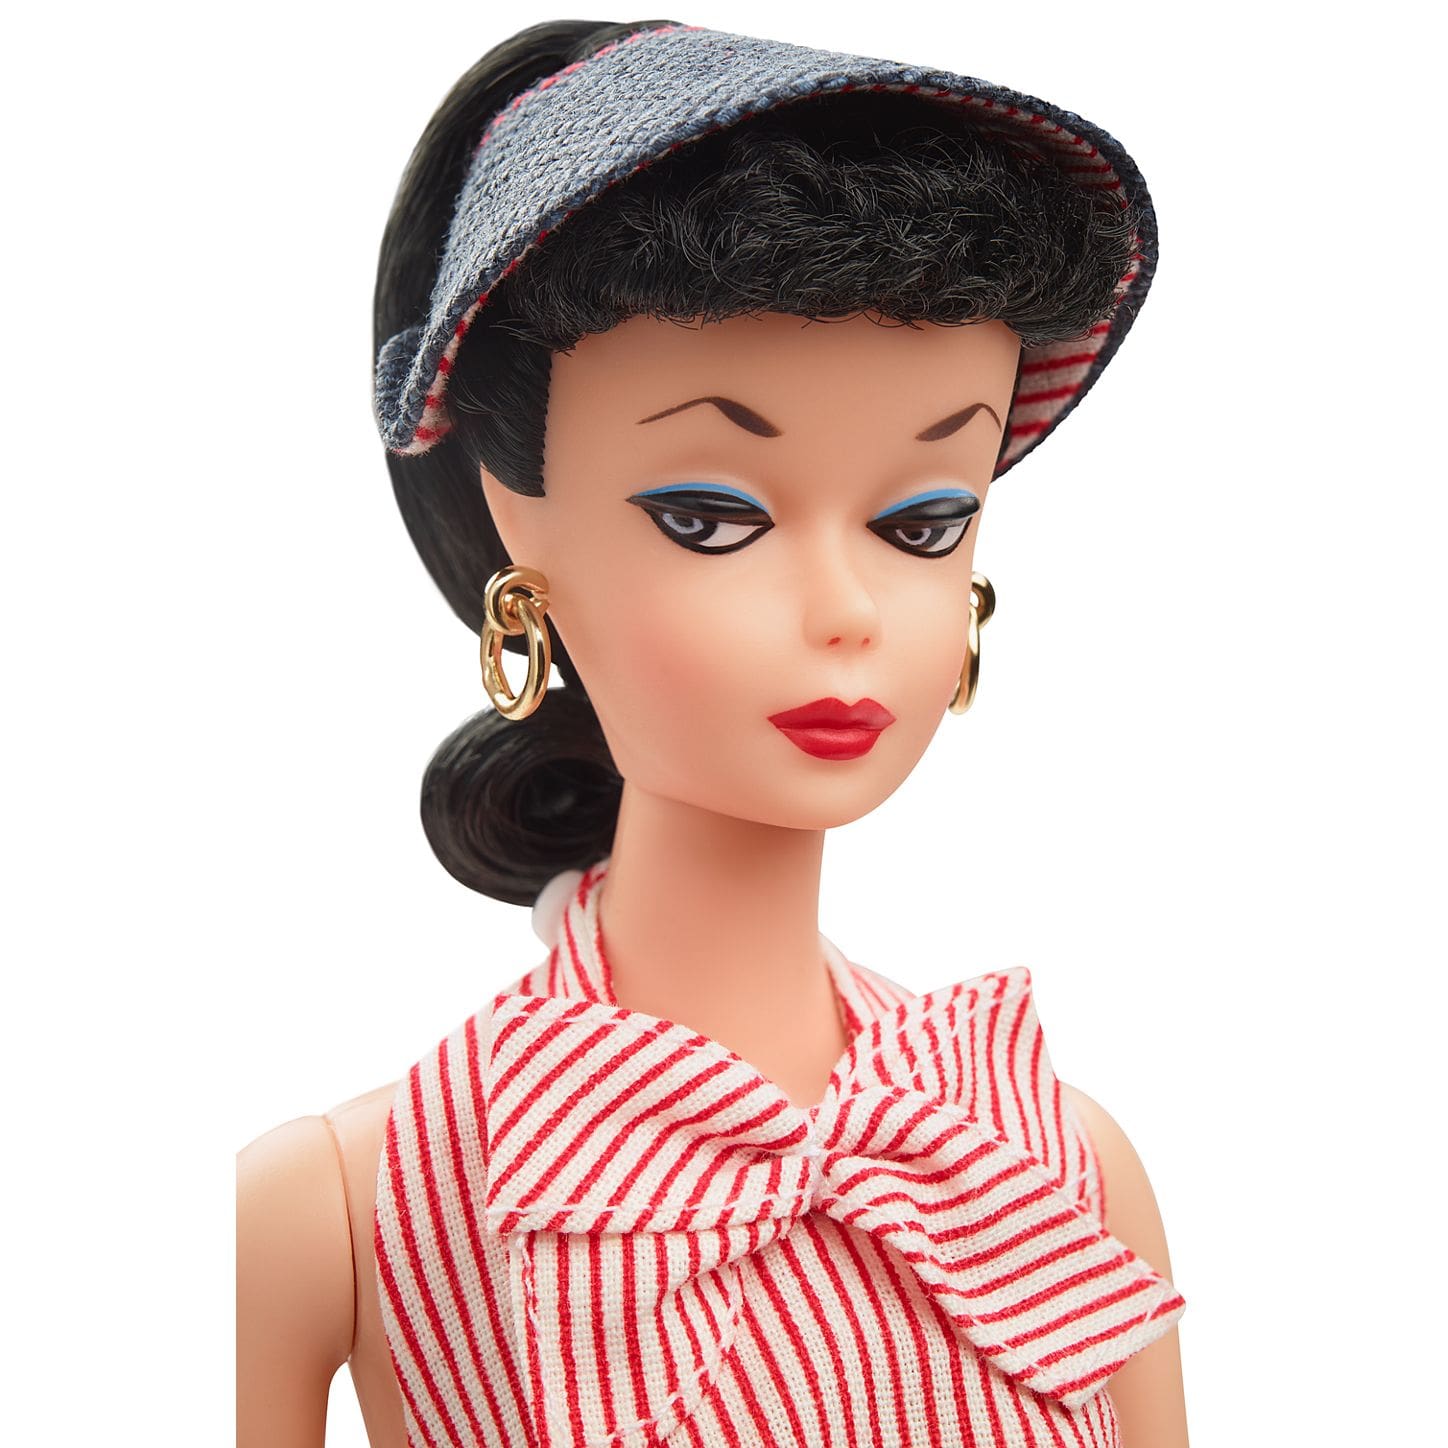 Details about   VIntage REPRODUCTION BUSY GAL BARBIE Repro FASHION REPLACEMENT BY PIECE U Choose 